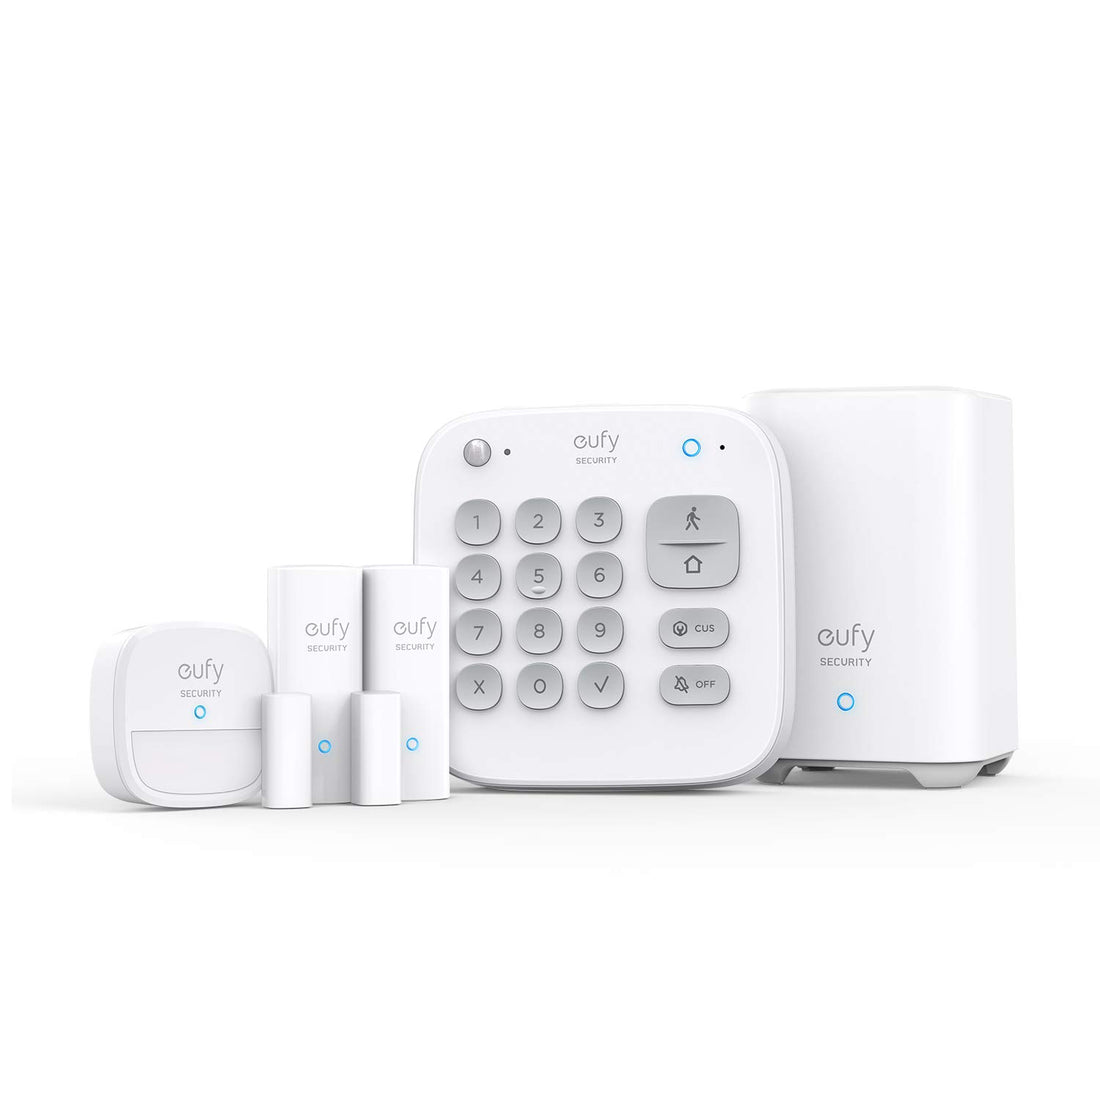 eufy Security 5-Piece Home Alarm Kit, Home Security System, Keypad, Motion Sensor, 2 Entry Sensors, Home Alarm System, Control from The App, Links with eufyCam